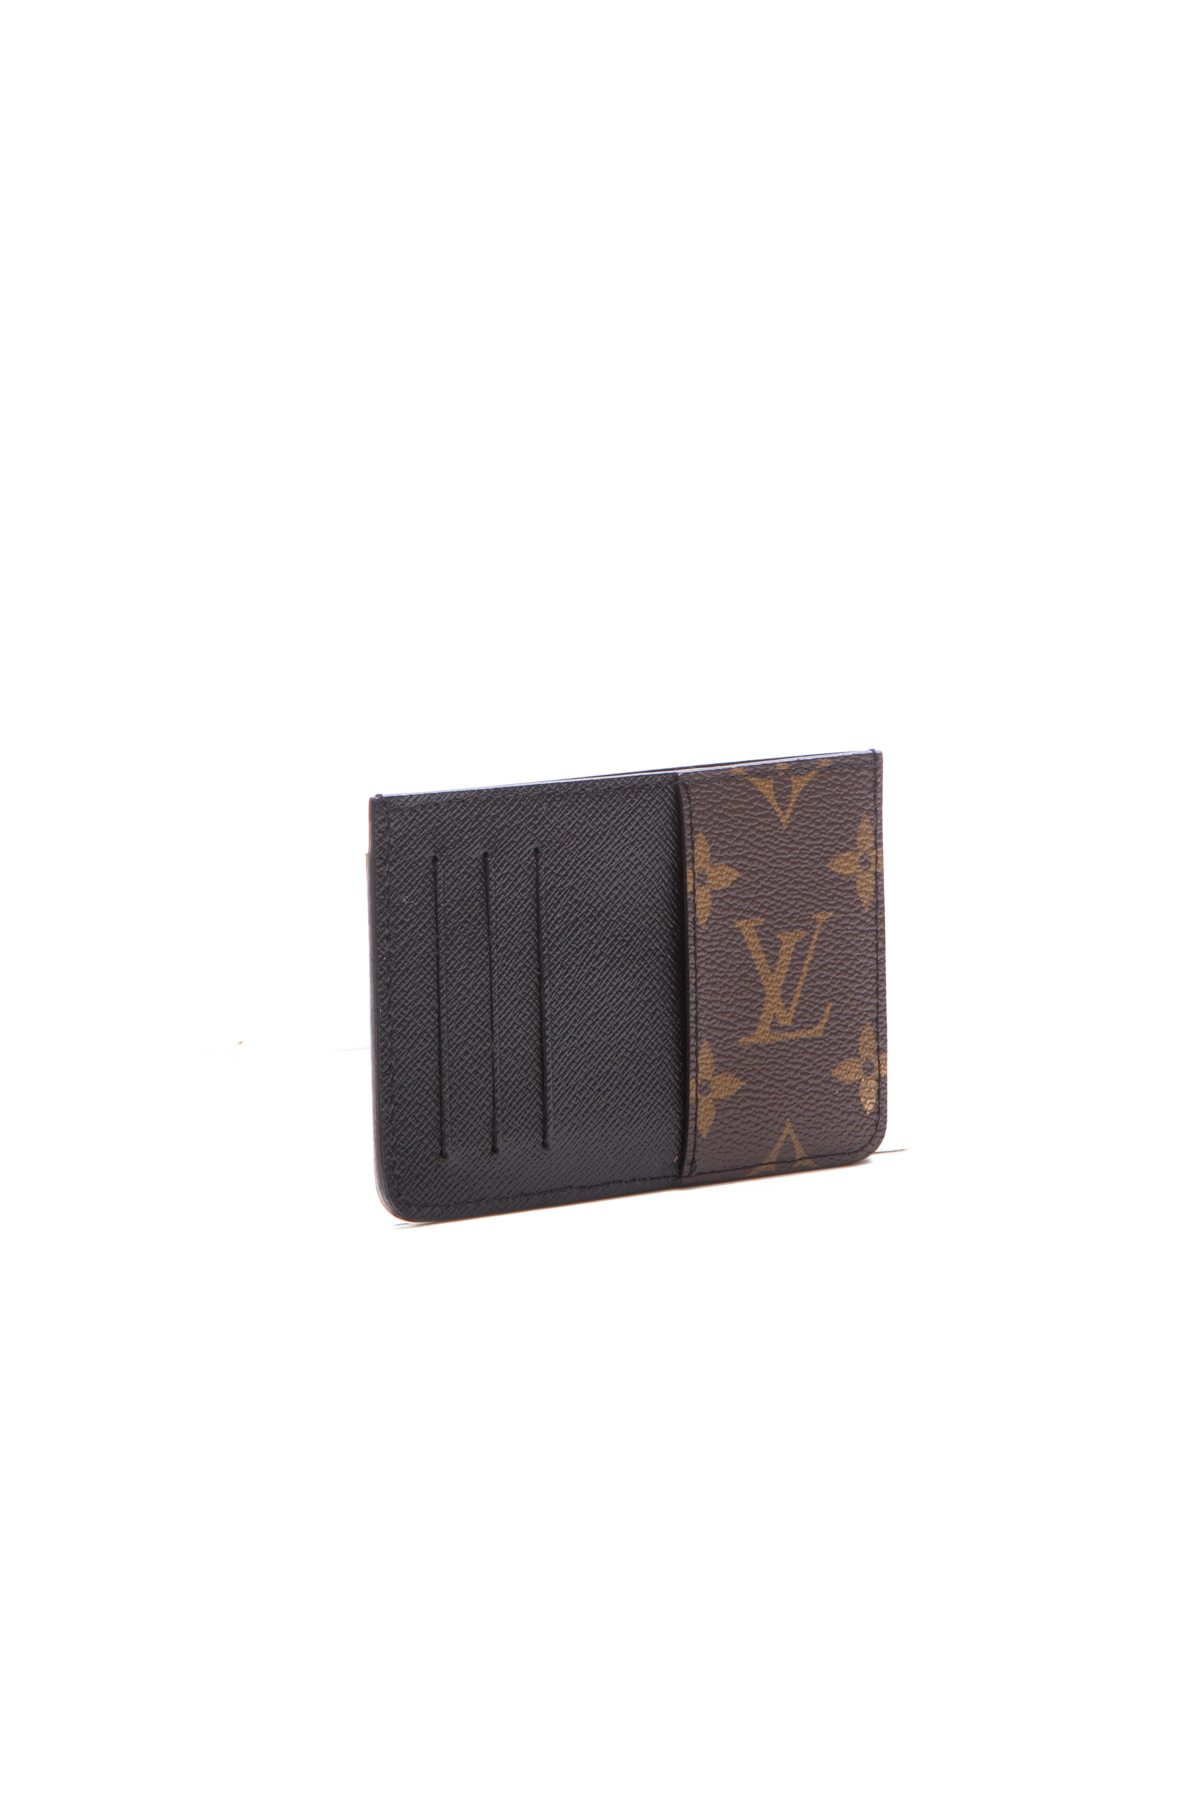 1 Year Later] Louis Vuitton Neo Porte Cartes Review -- Wallet/Cardholder! 